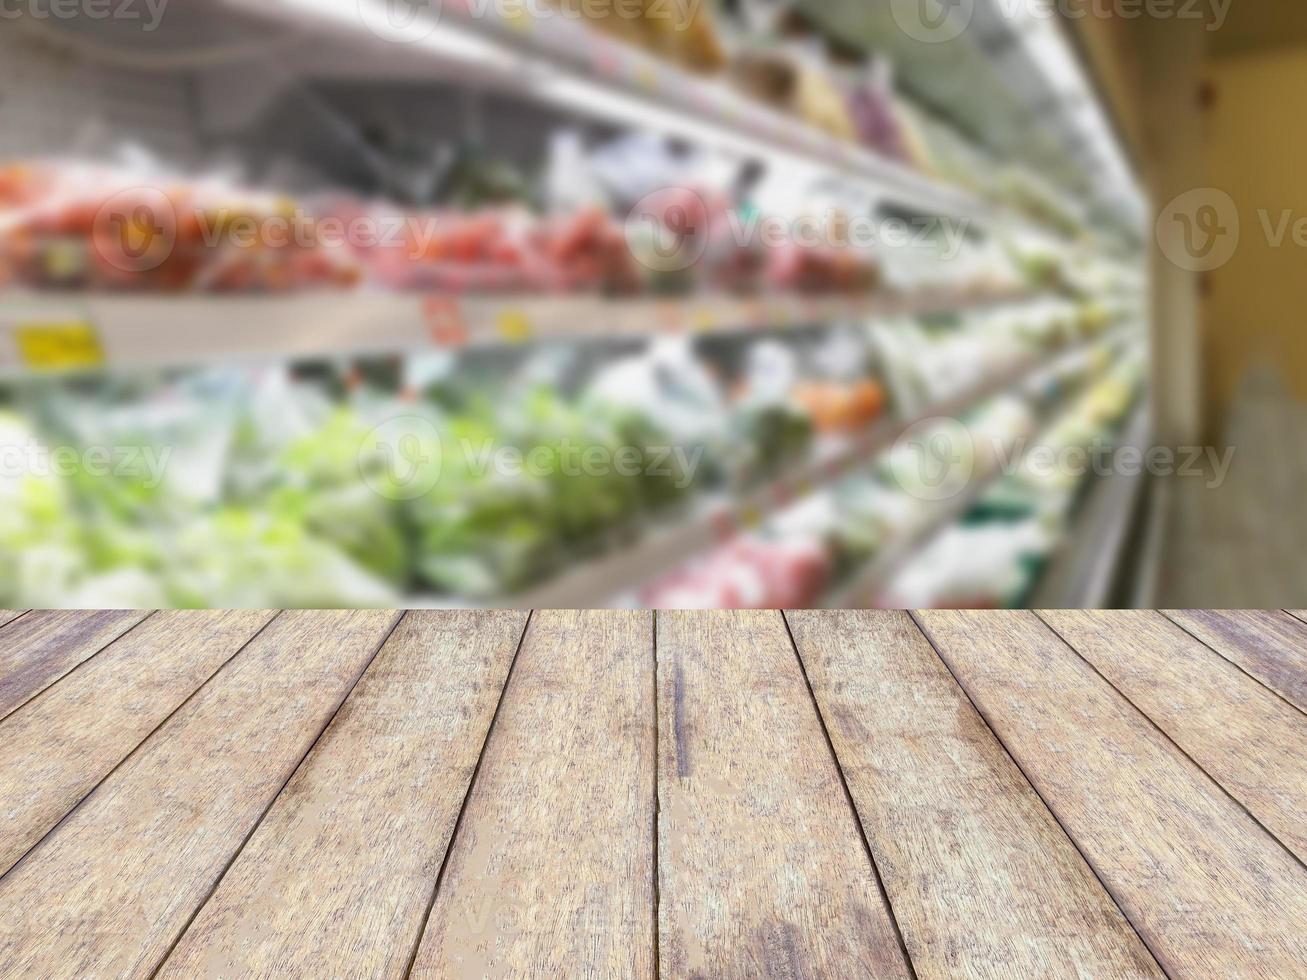 Shelf with fruits in supermarket photo